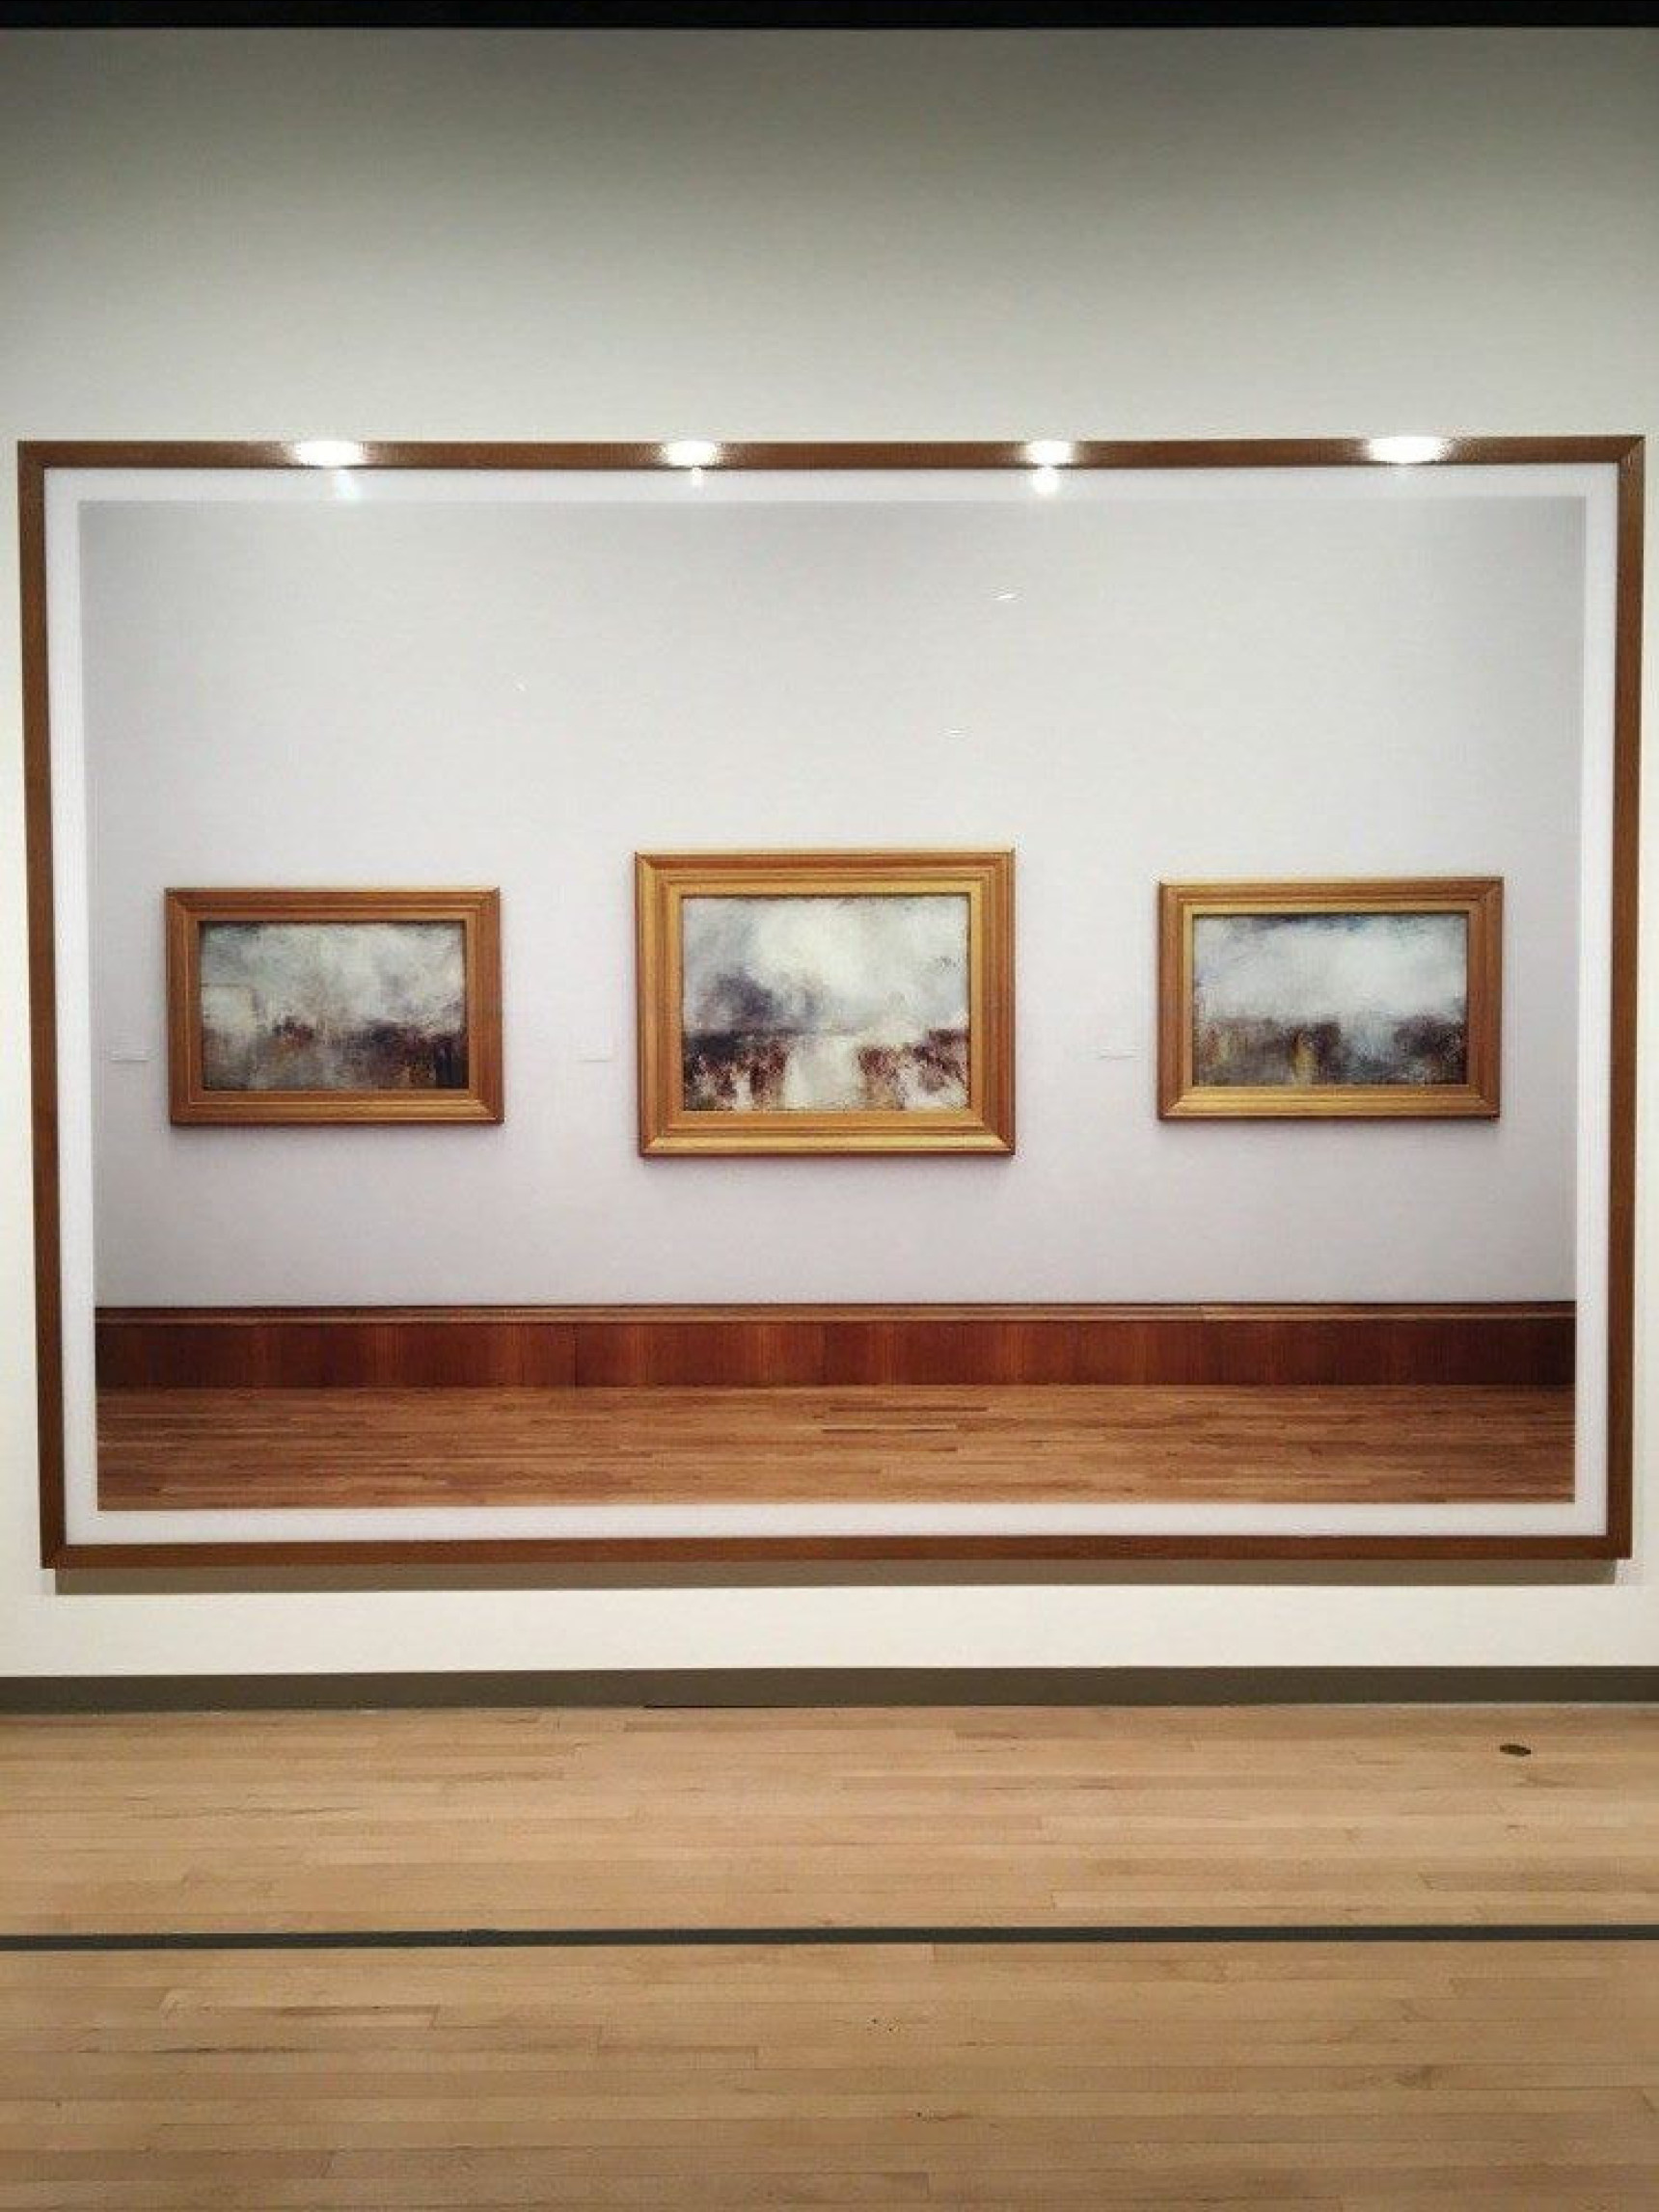 Andrea Gursky artwork - 3 paintings on a wall